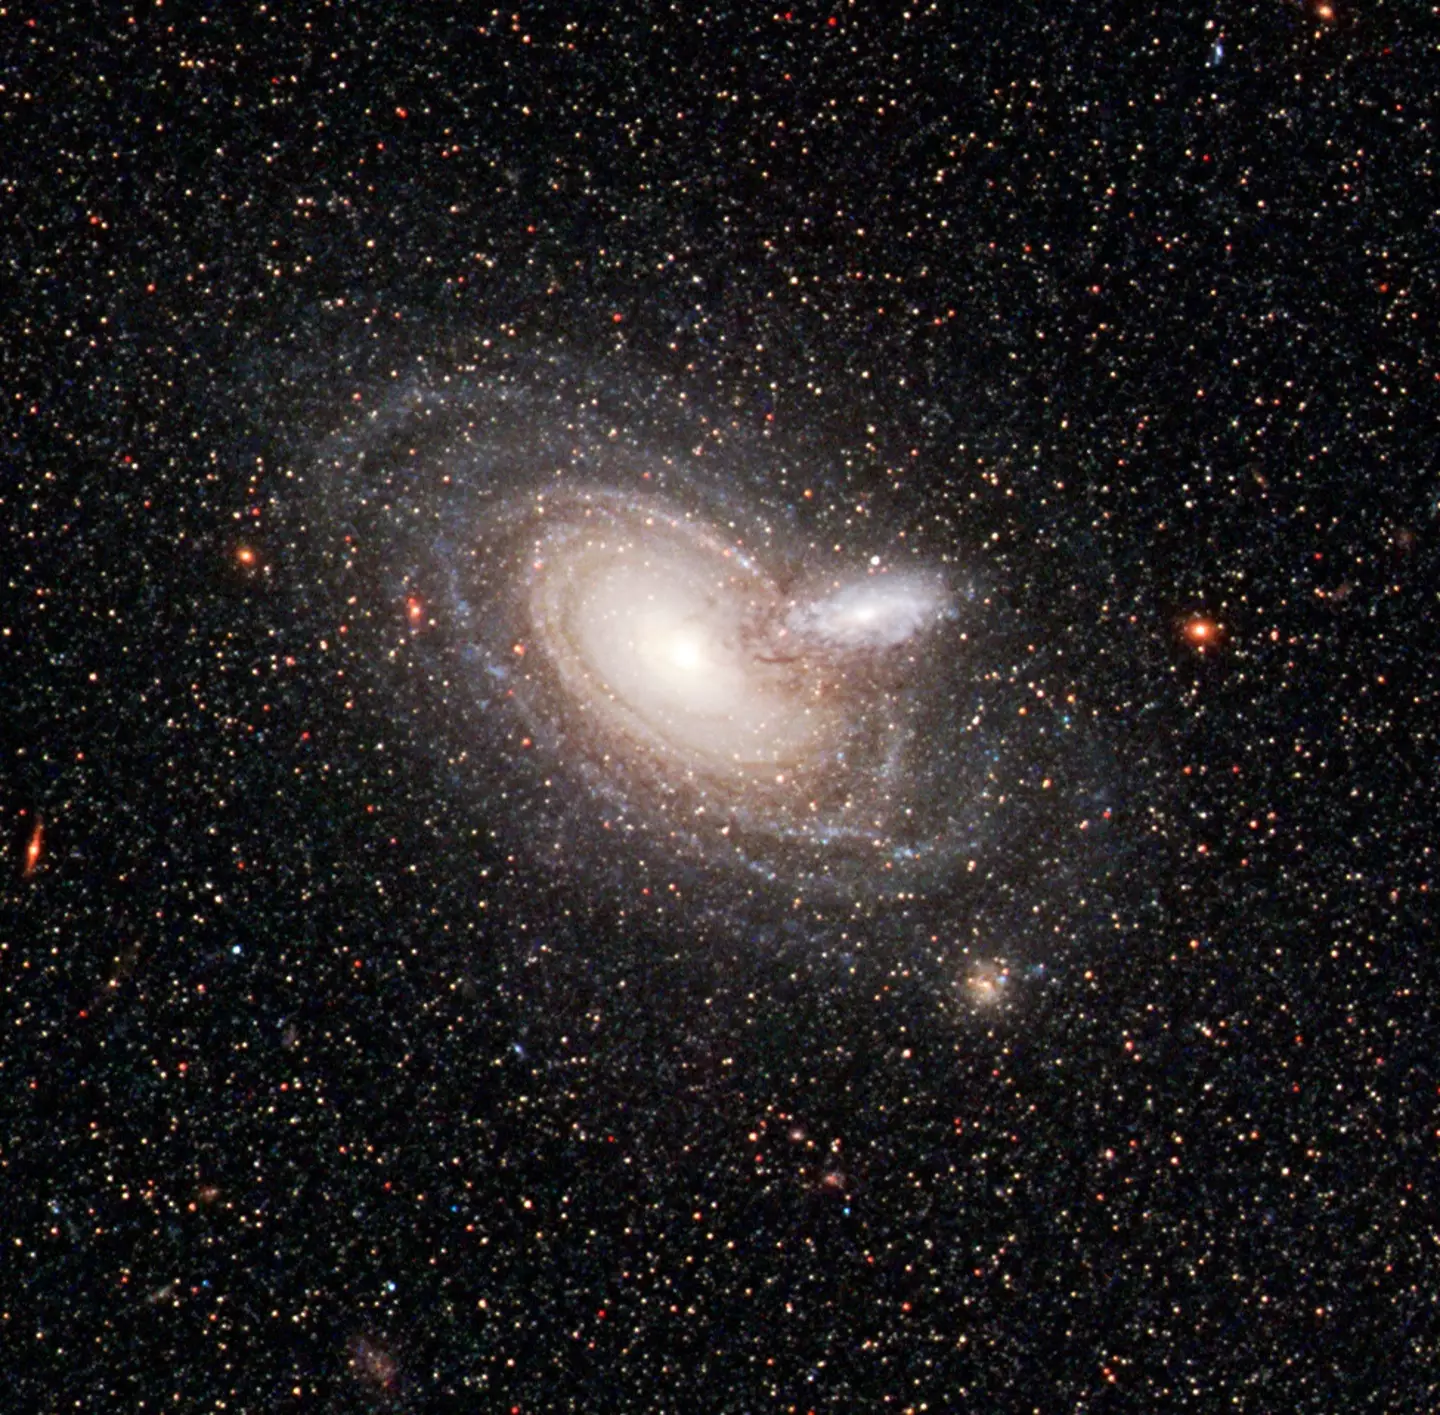 Galaxies could be a lot older than we think.